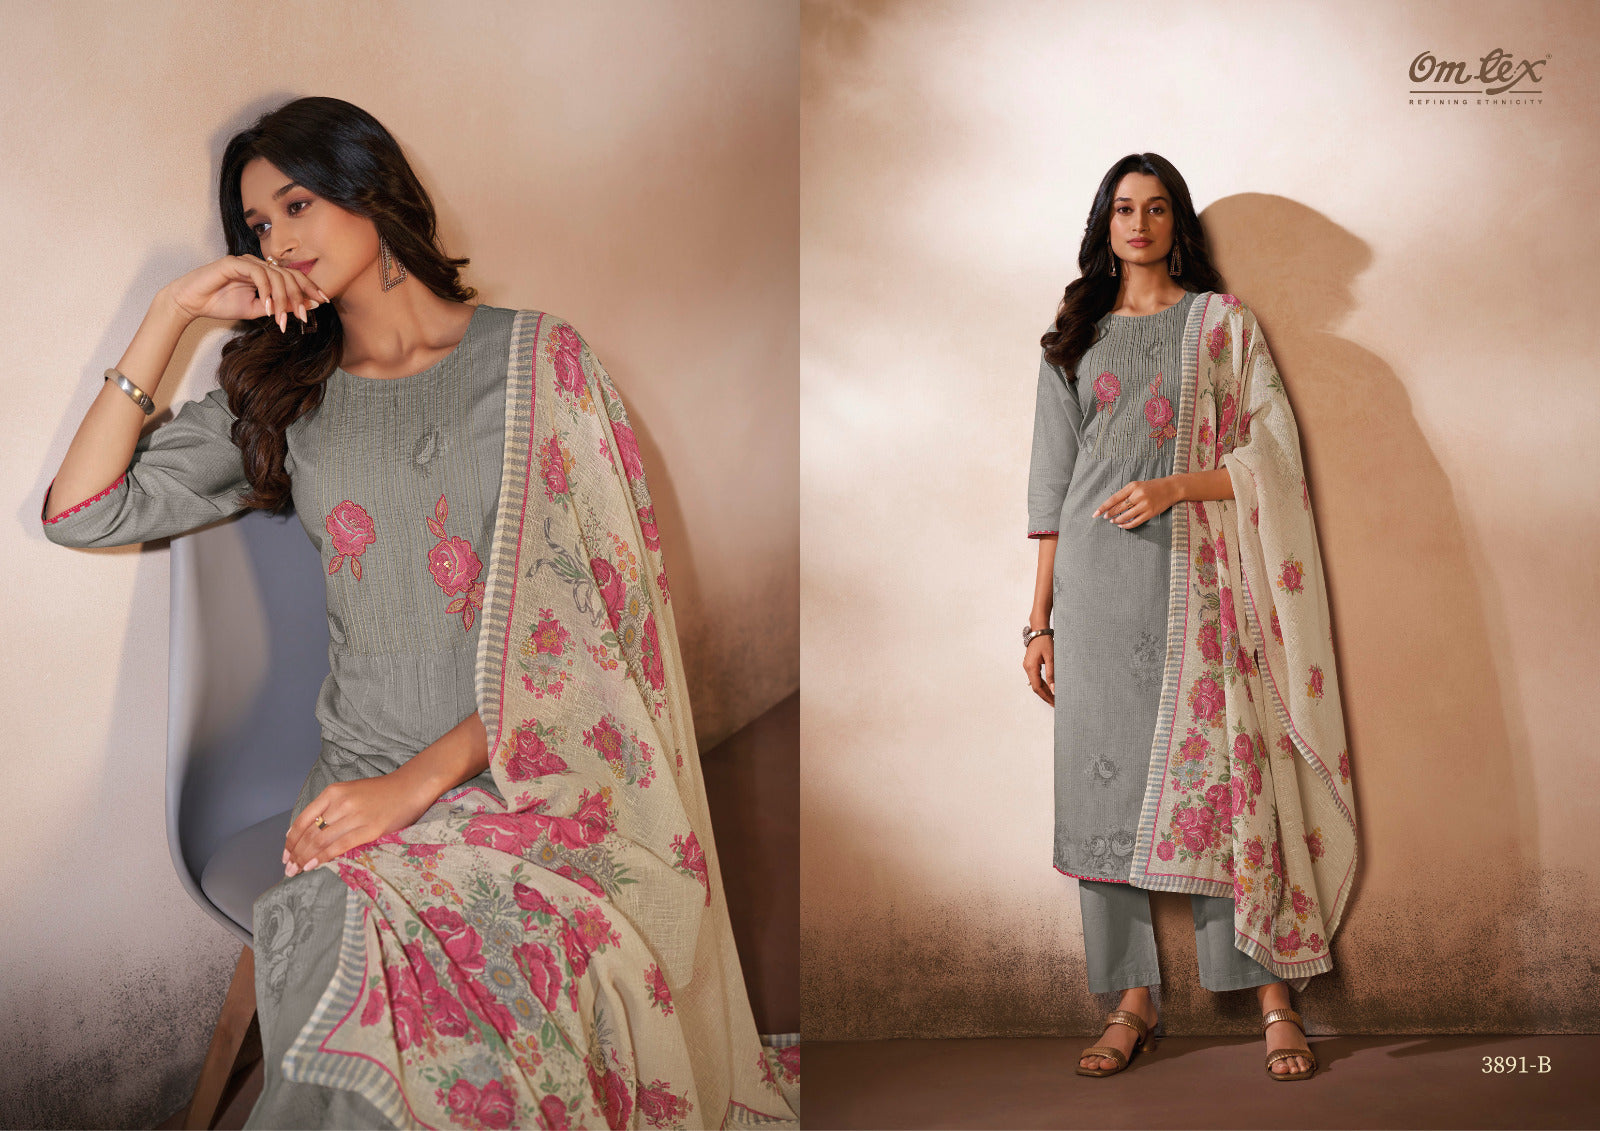 Atisha Omtex Lawn Cotton Pant Style Suits